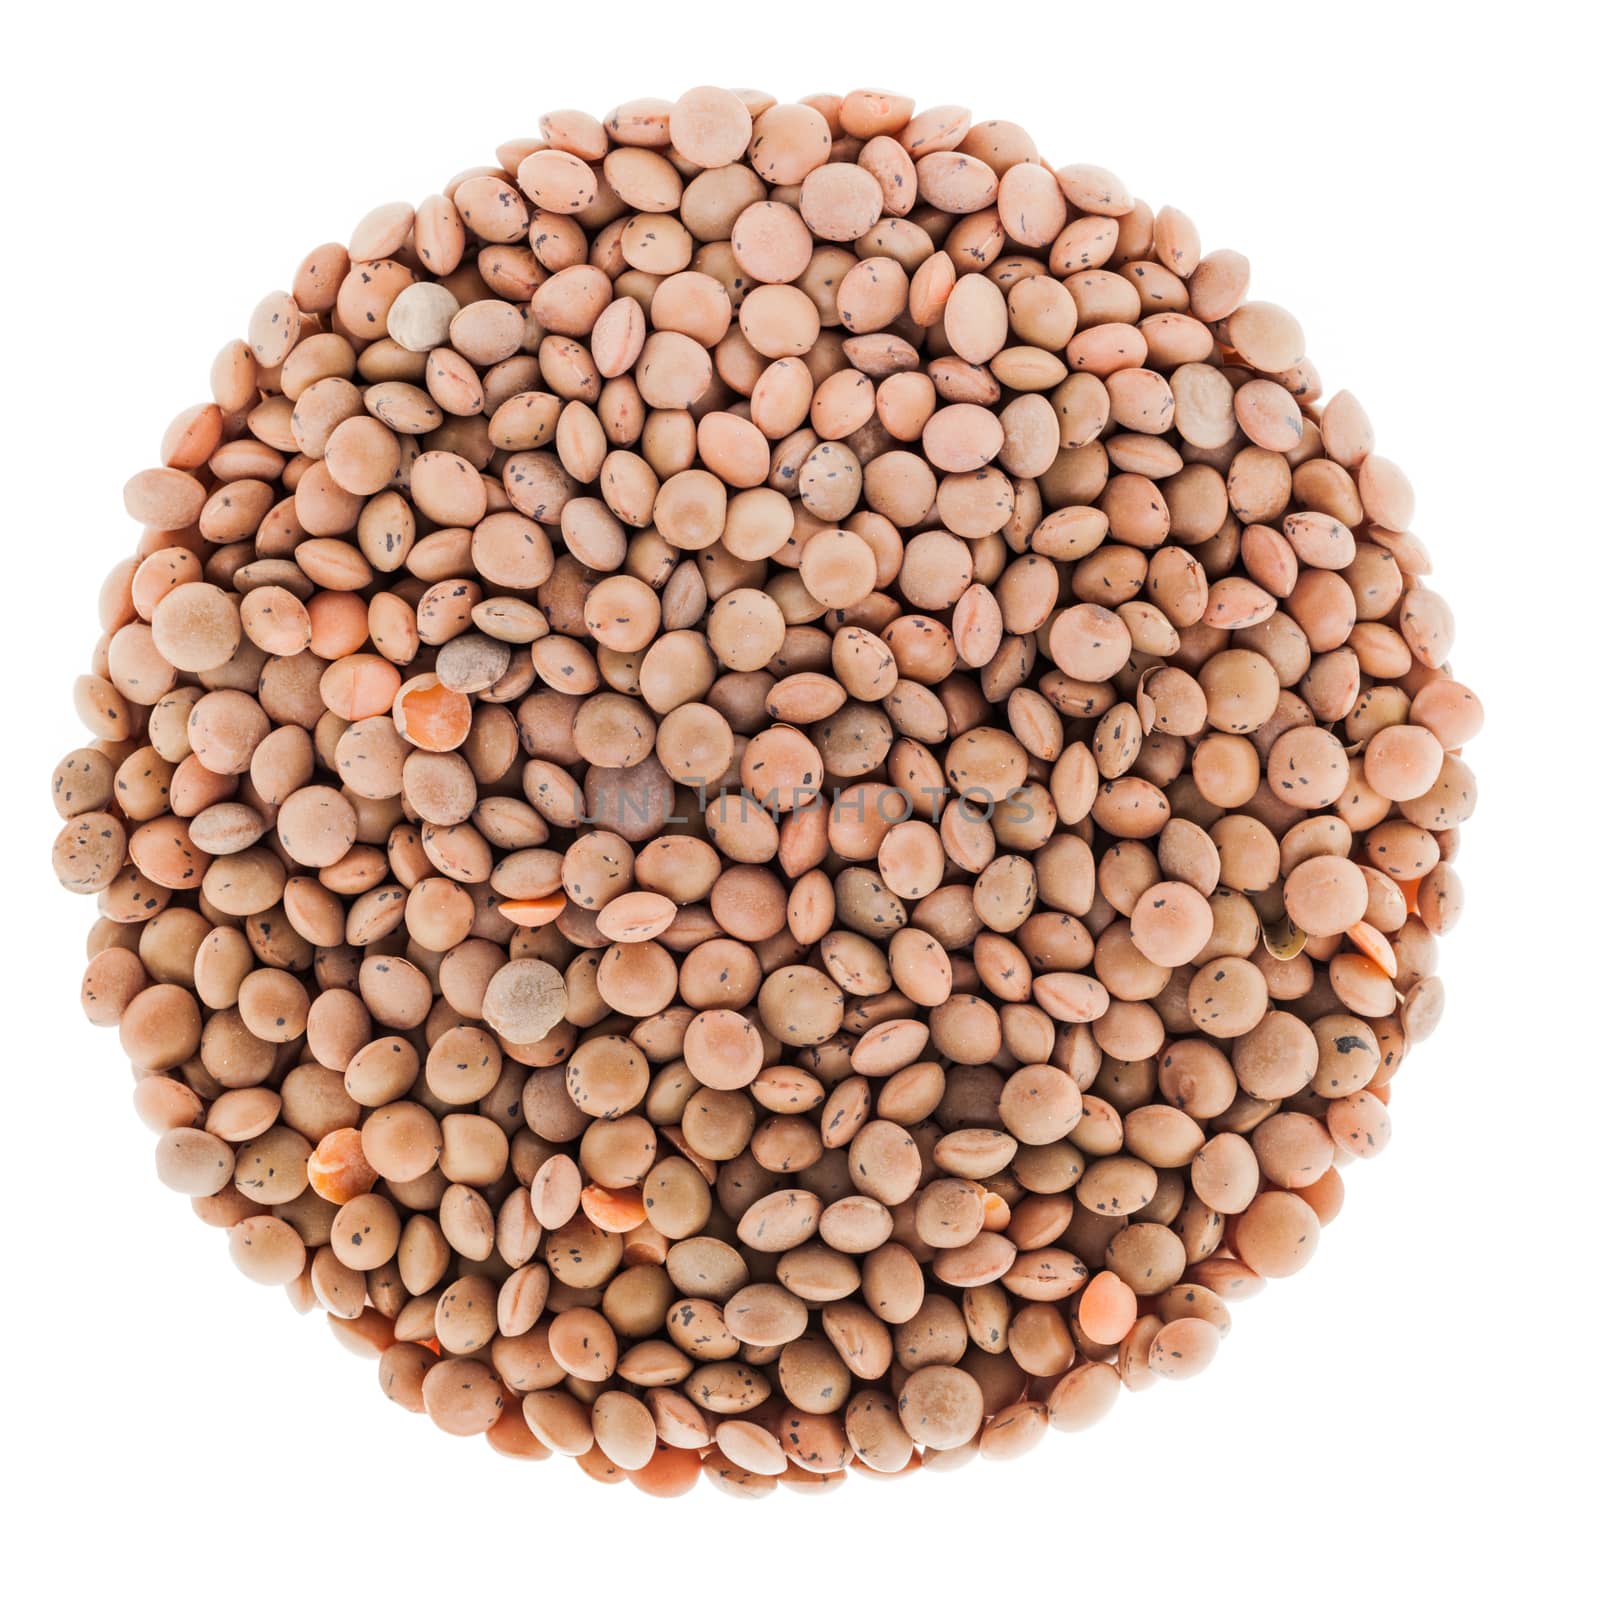 Perfect Circle of Lentils Isolated on White Background